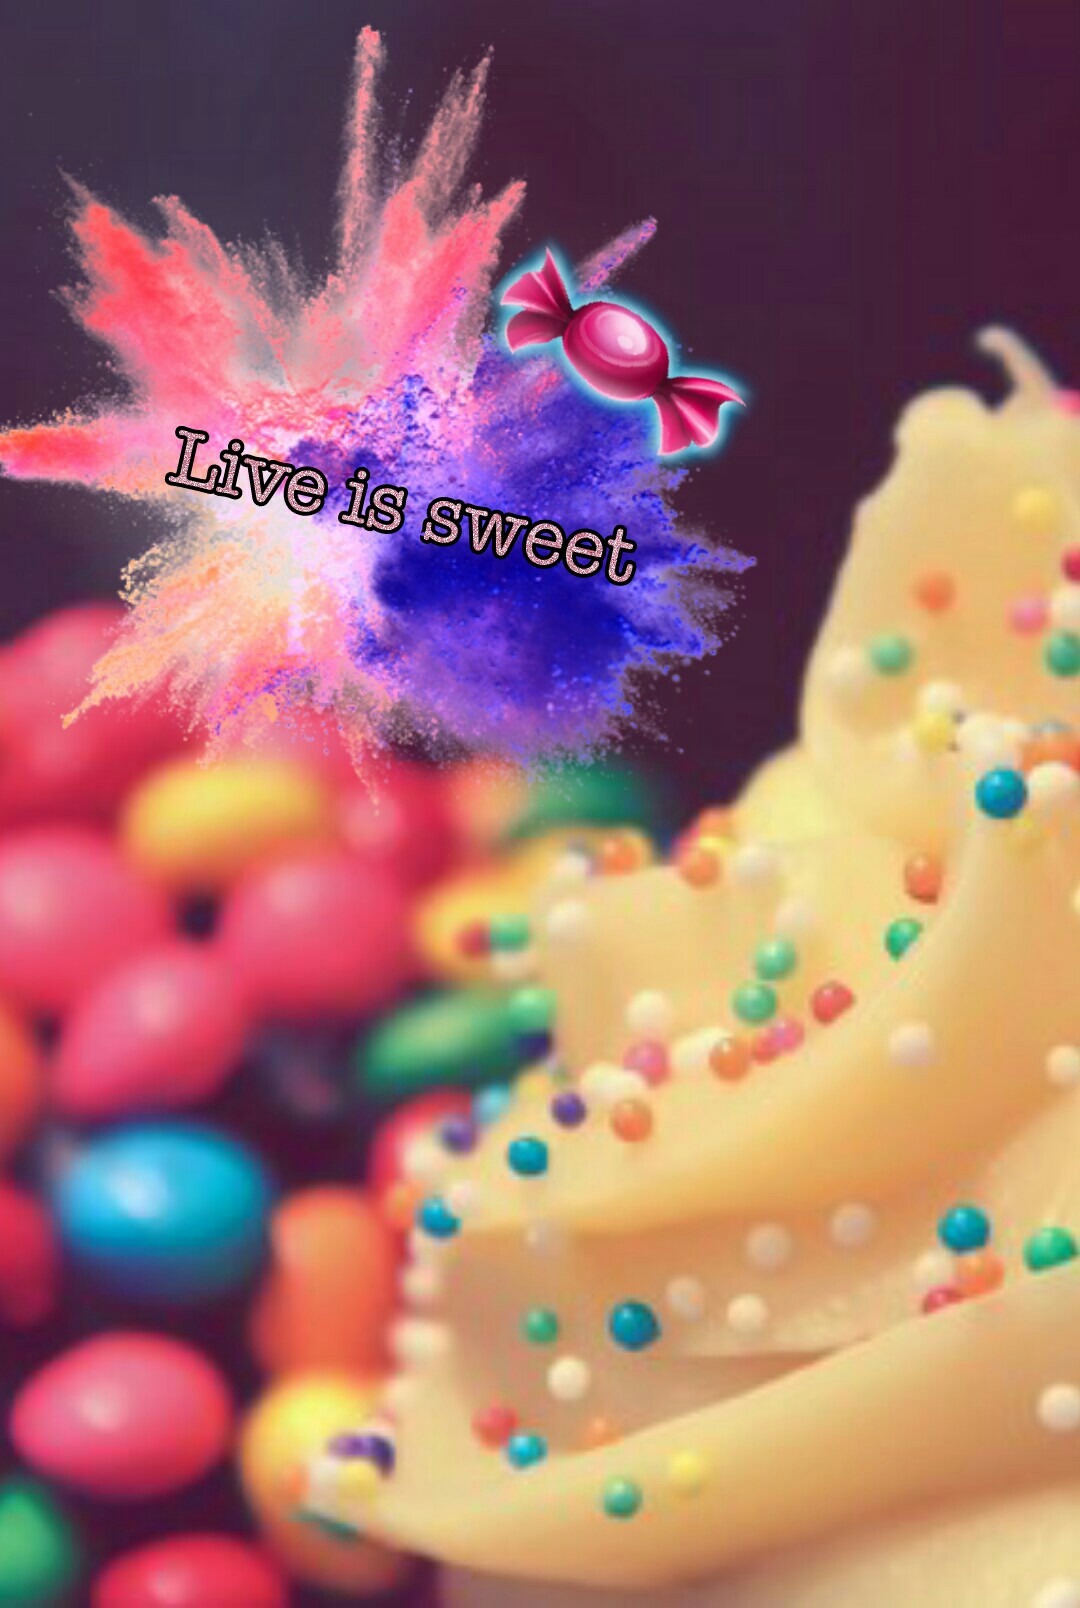 Live is sweet